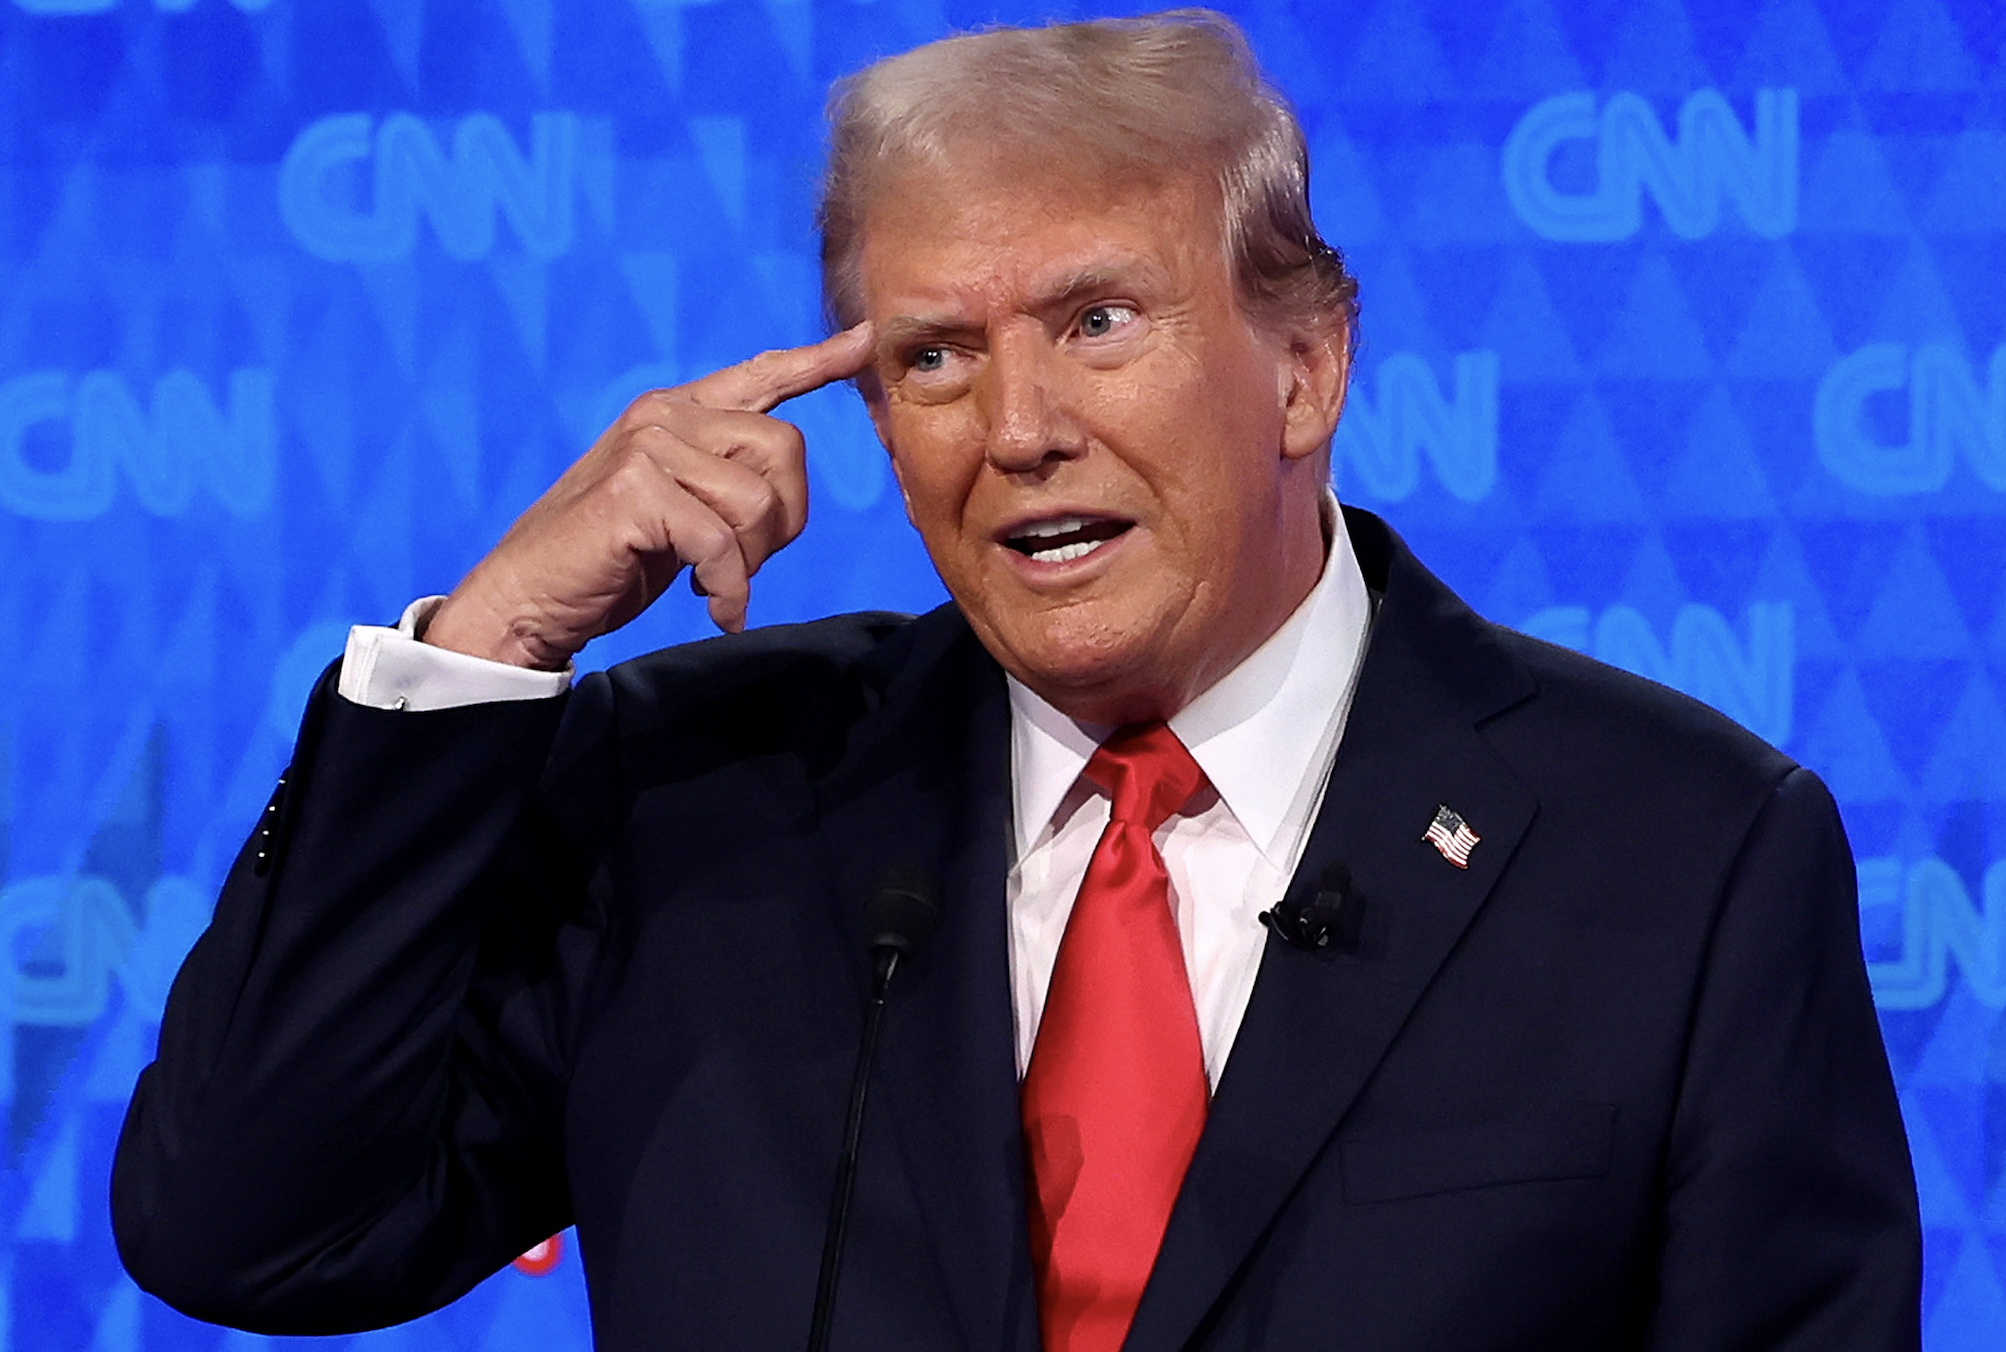 Donald Trump gestures by pointing to his head while speaking at a CNN event. He is wearing a dark suit with a white shirt and a red tie